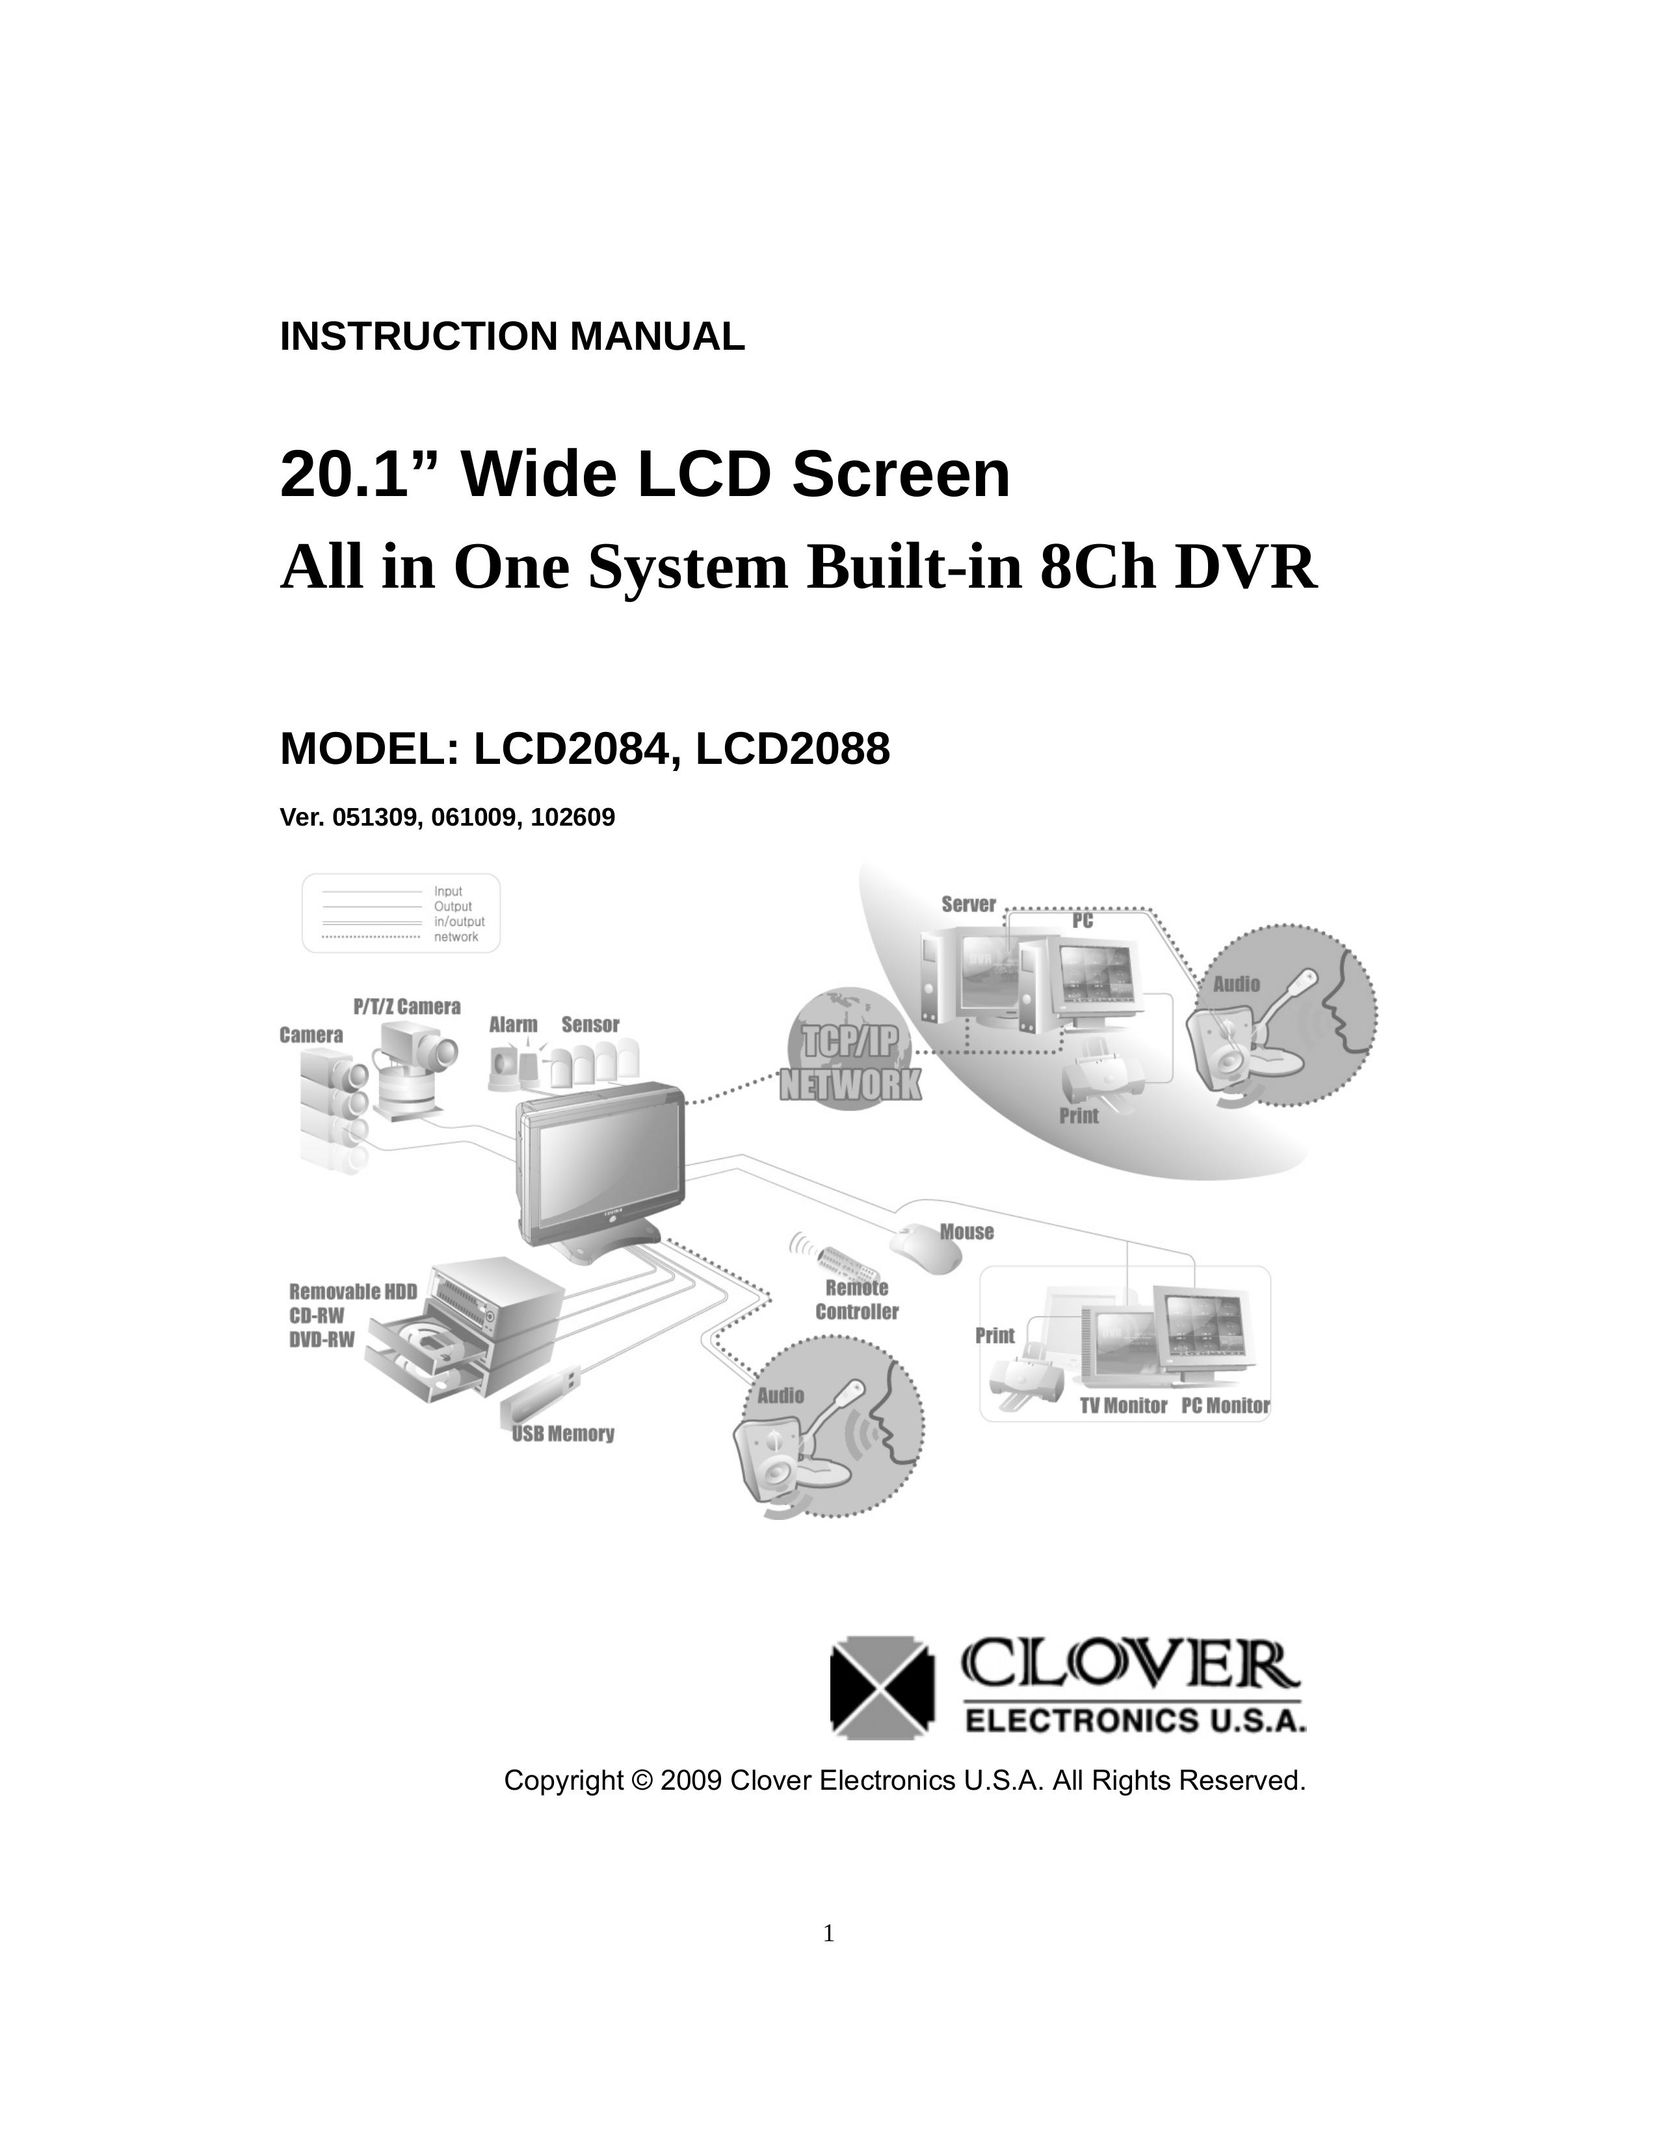 Clover Electronics LCD2088 Flat Panel Television User Manual